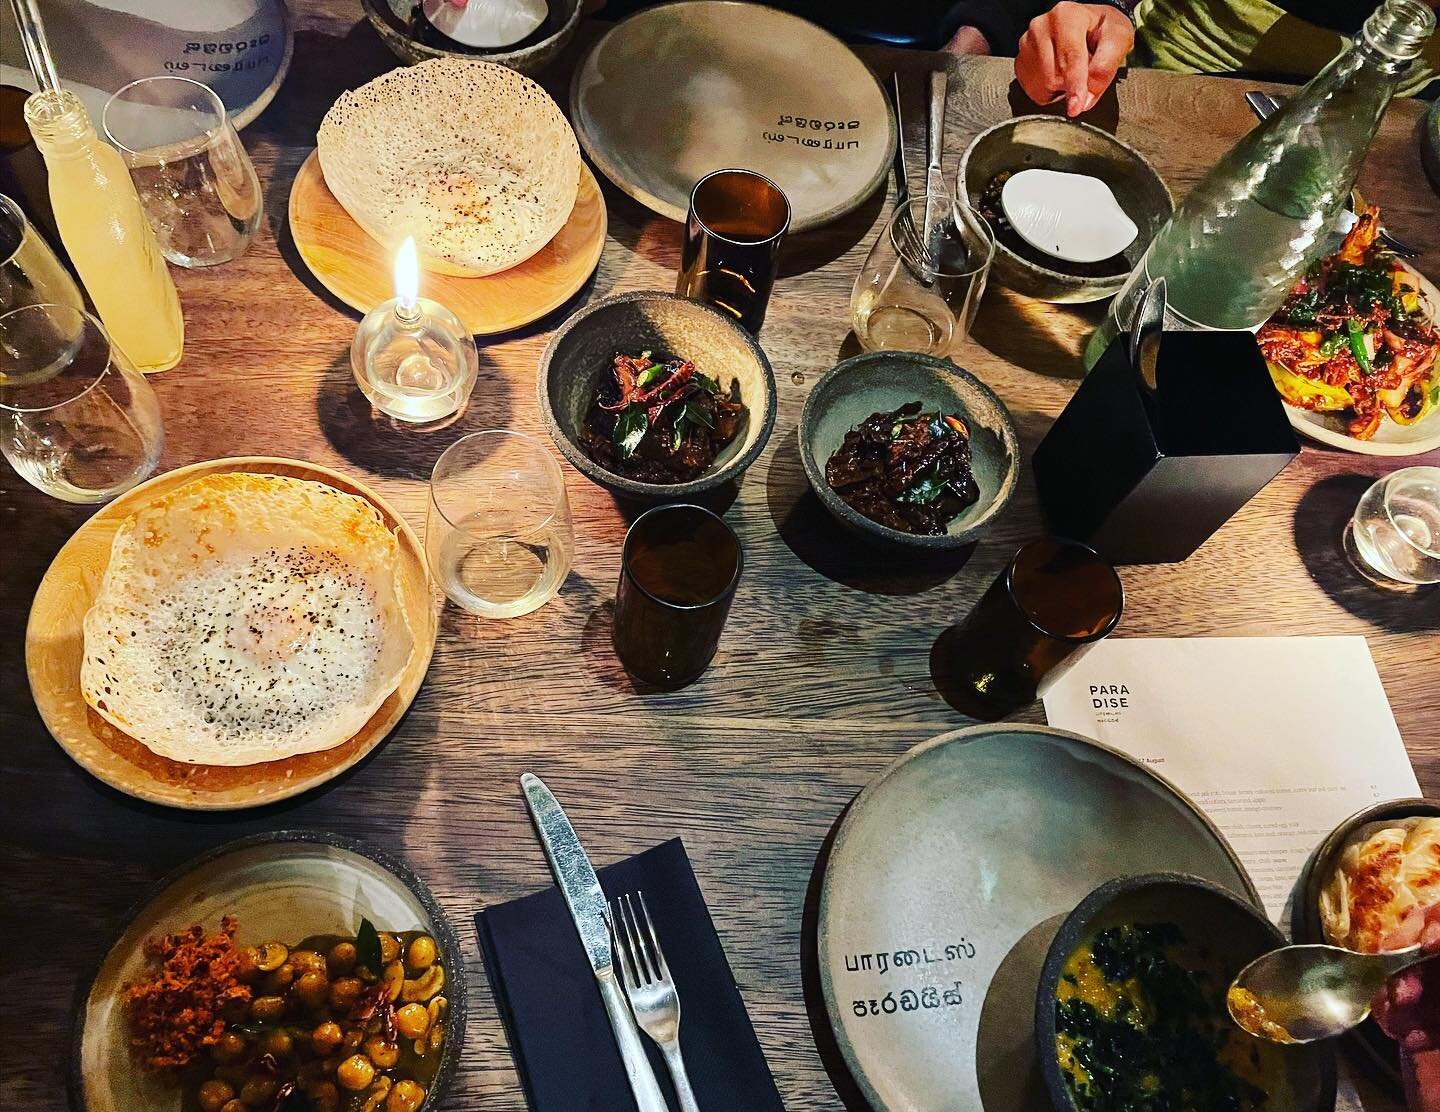 Absolutely phenomenal Sri Lankan meal @paradisesoho last night. Stunning flavors from ethically sourced produce, terrific service and vibe. Best part for me was finding @martinannaarndorfer 's Gr&uuml;ner Veltliner on tap from reusable mini-kegs spec